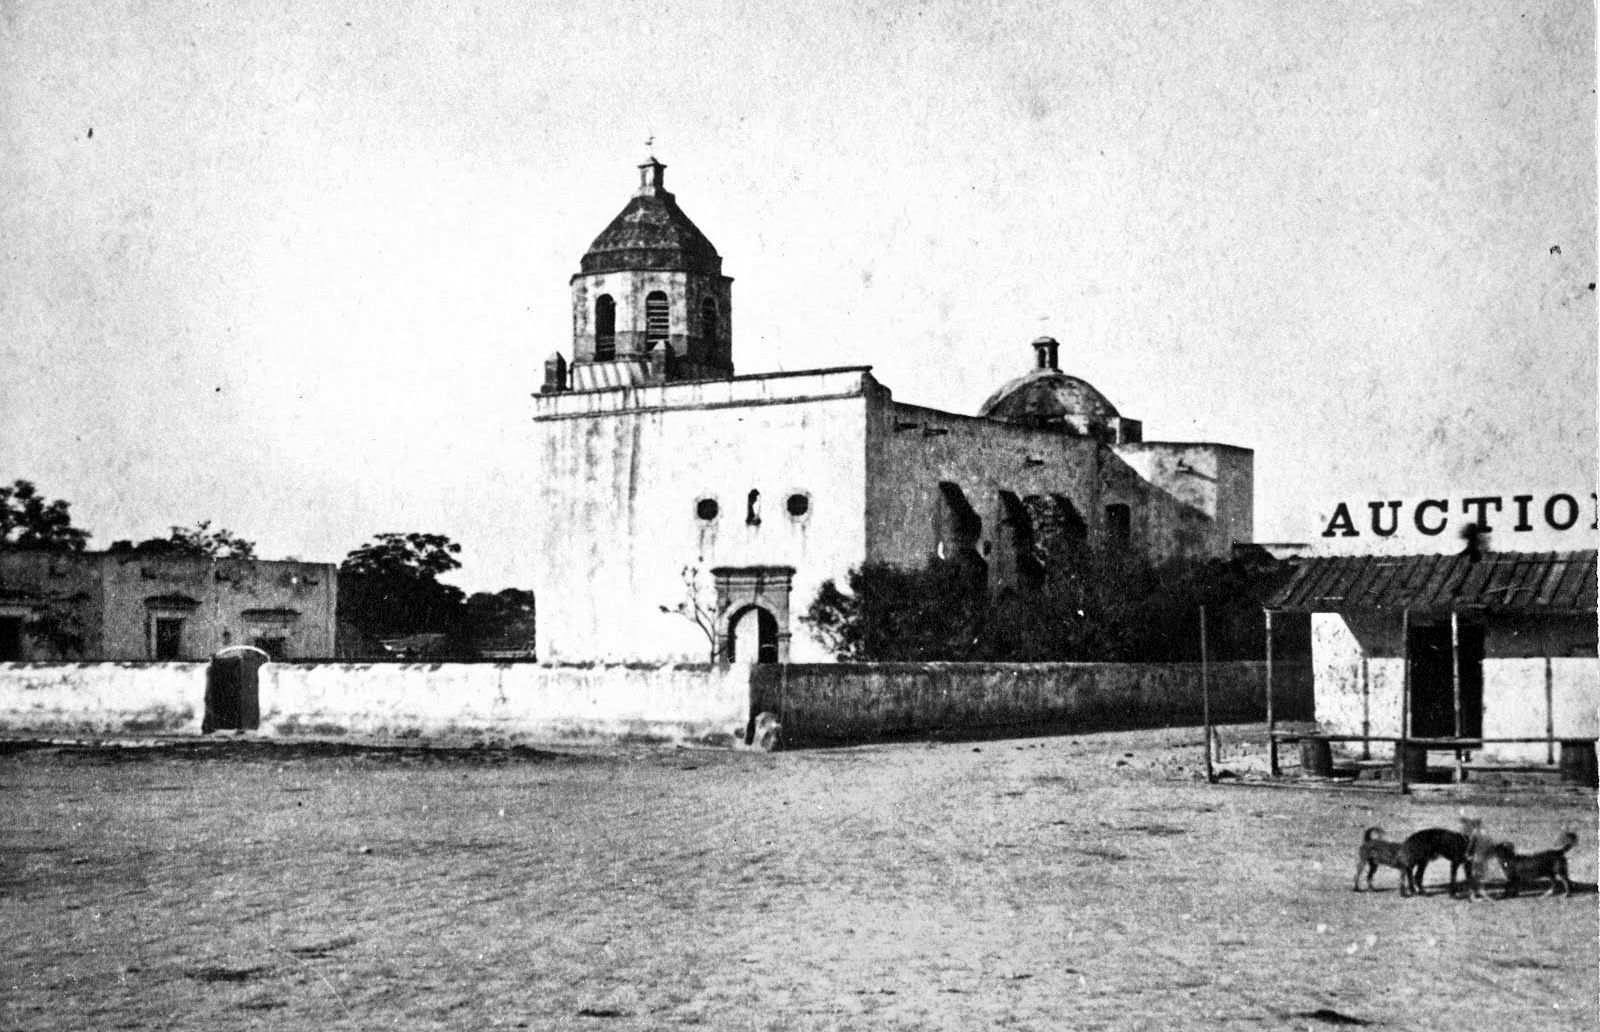 This early photograph is believed to be the Council House, a one-story 18th century stone building directly across from San Fernando Cathedral on the east side the Main Plaza in San Antonio, Texas. The building, which served as the courthouse with the local jail adjoining it, was the site of the 1840 meeting between Texas representatives and the Comanche delegation.